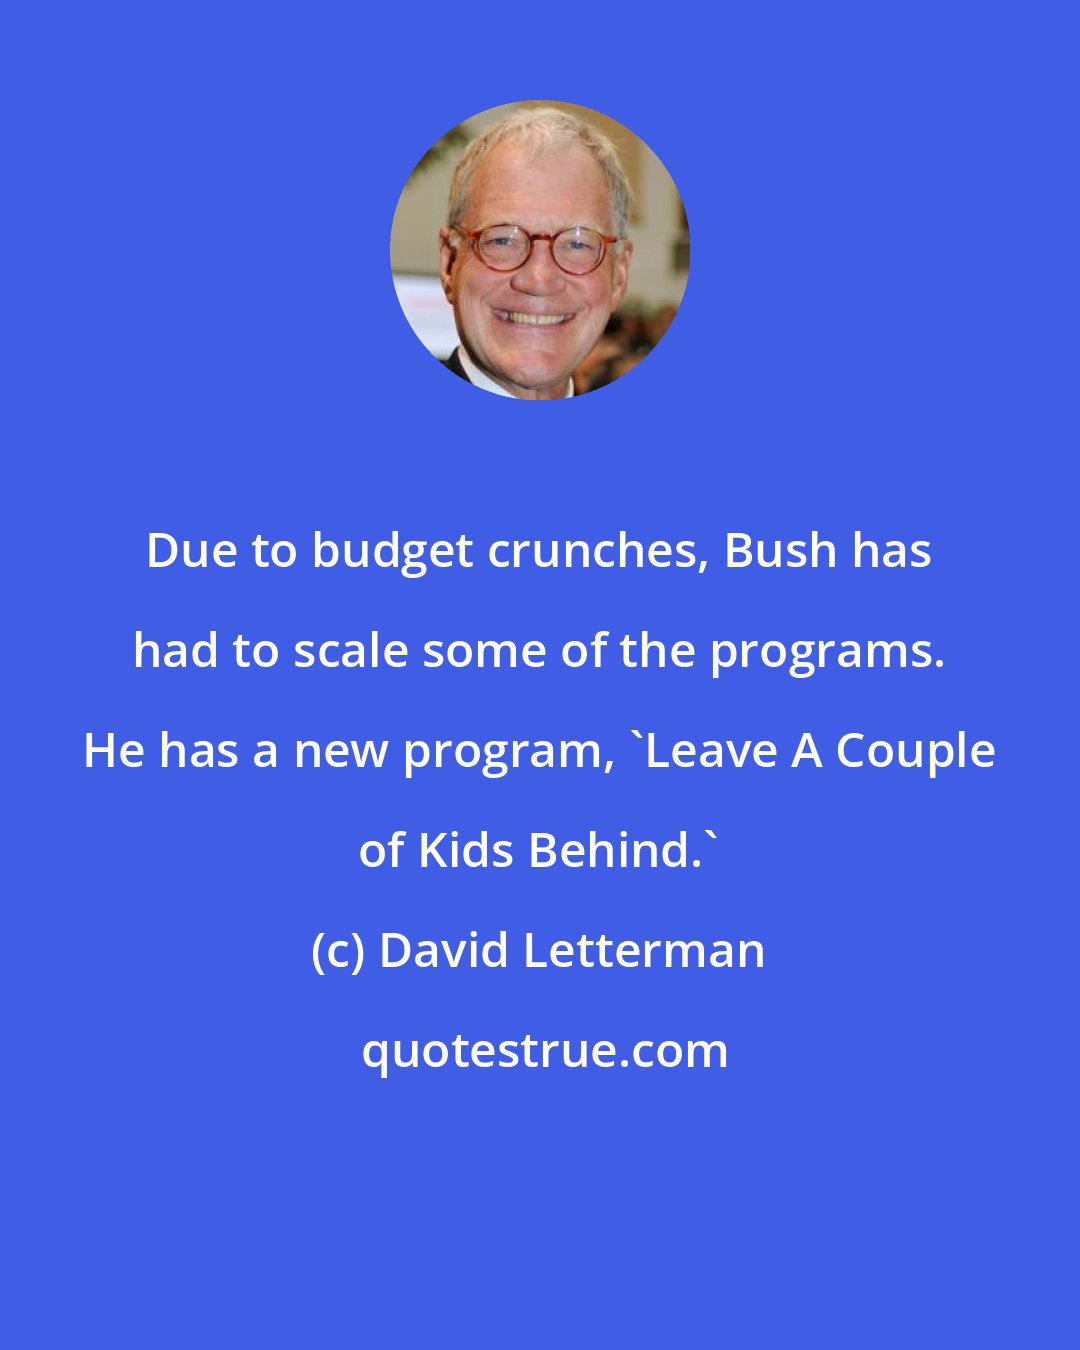 David Letterman: Due to budget crunches, Bush has had to scale some of the programs. He has a new program, 'Leave A Couple of Kids Behind.'